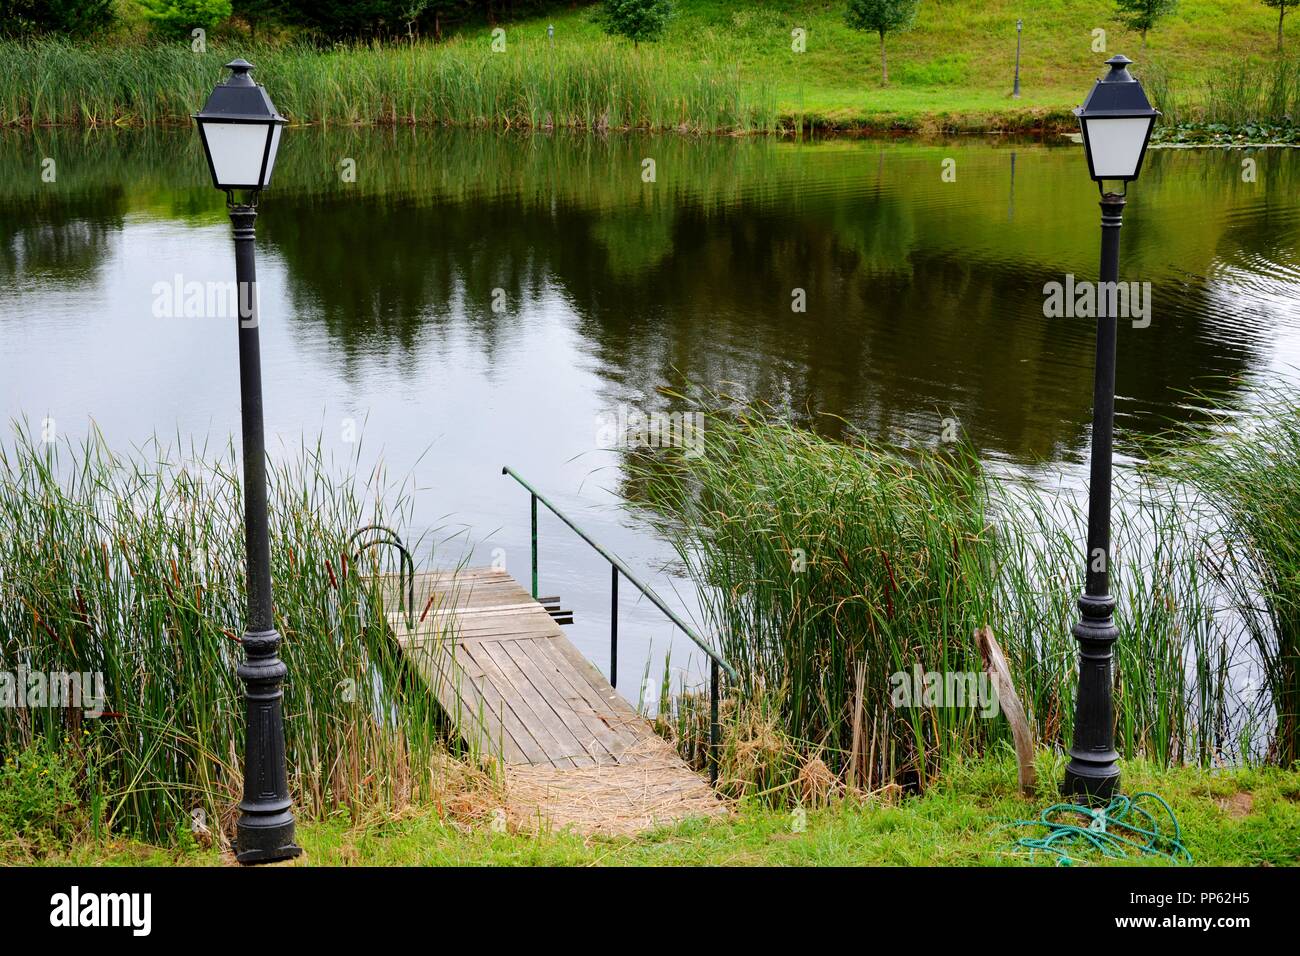 reflections in the lake and street lamps Stock Photo